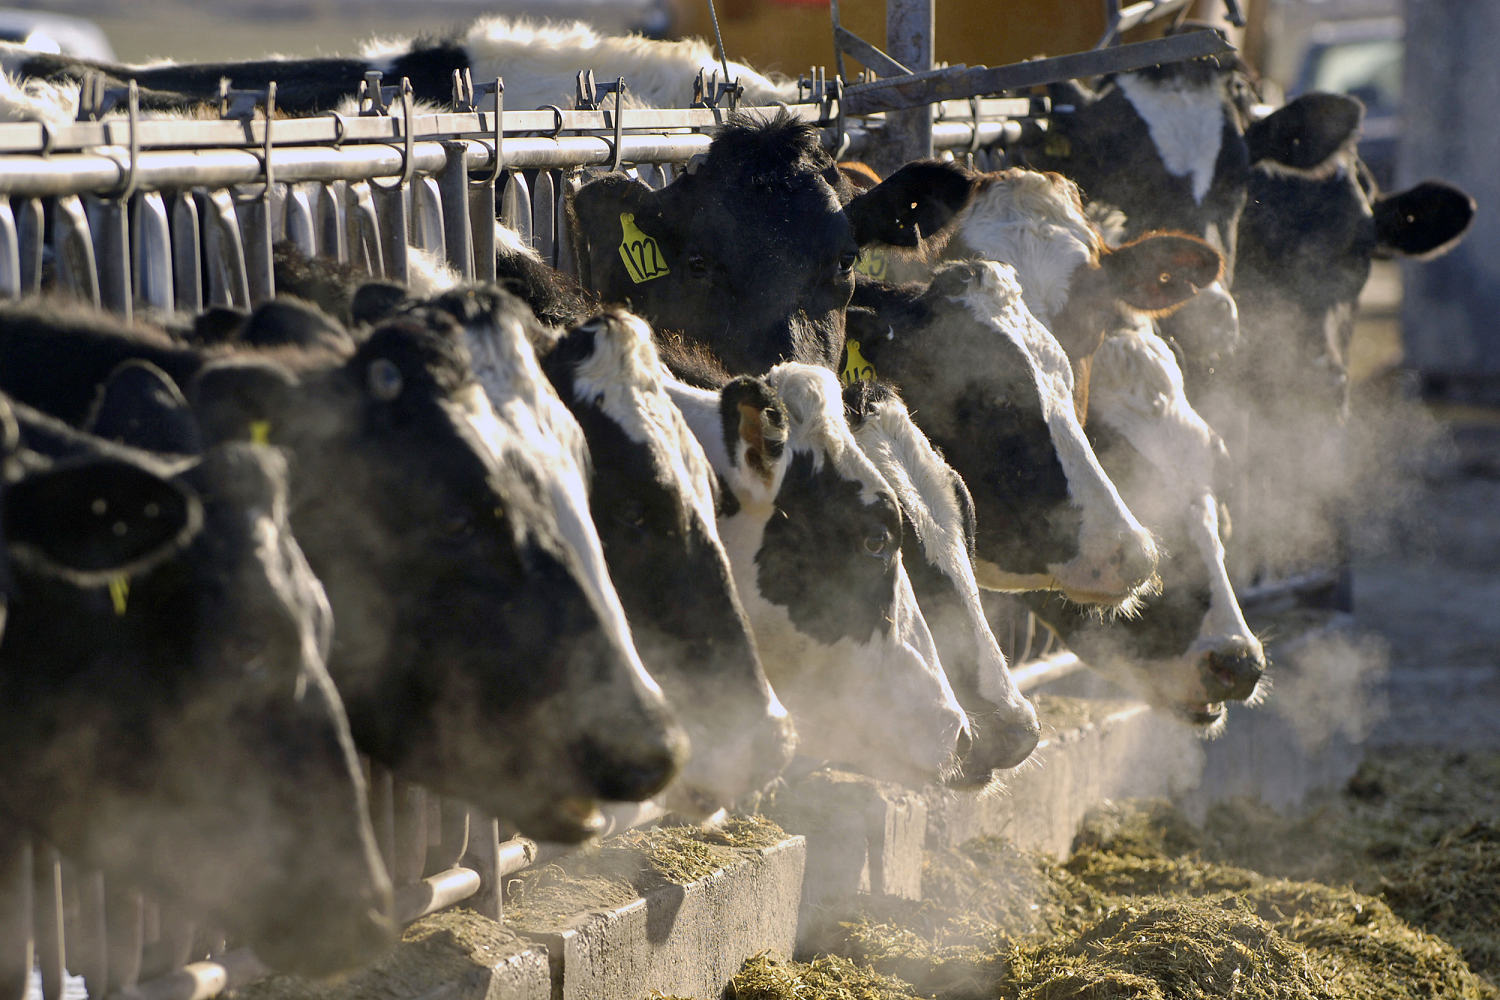 4th case of bird flu linked to dairy cows detected in Colorado